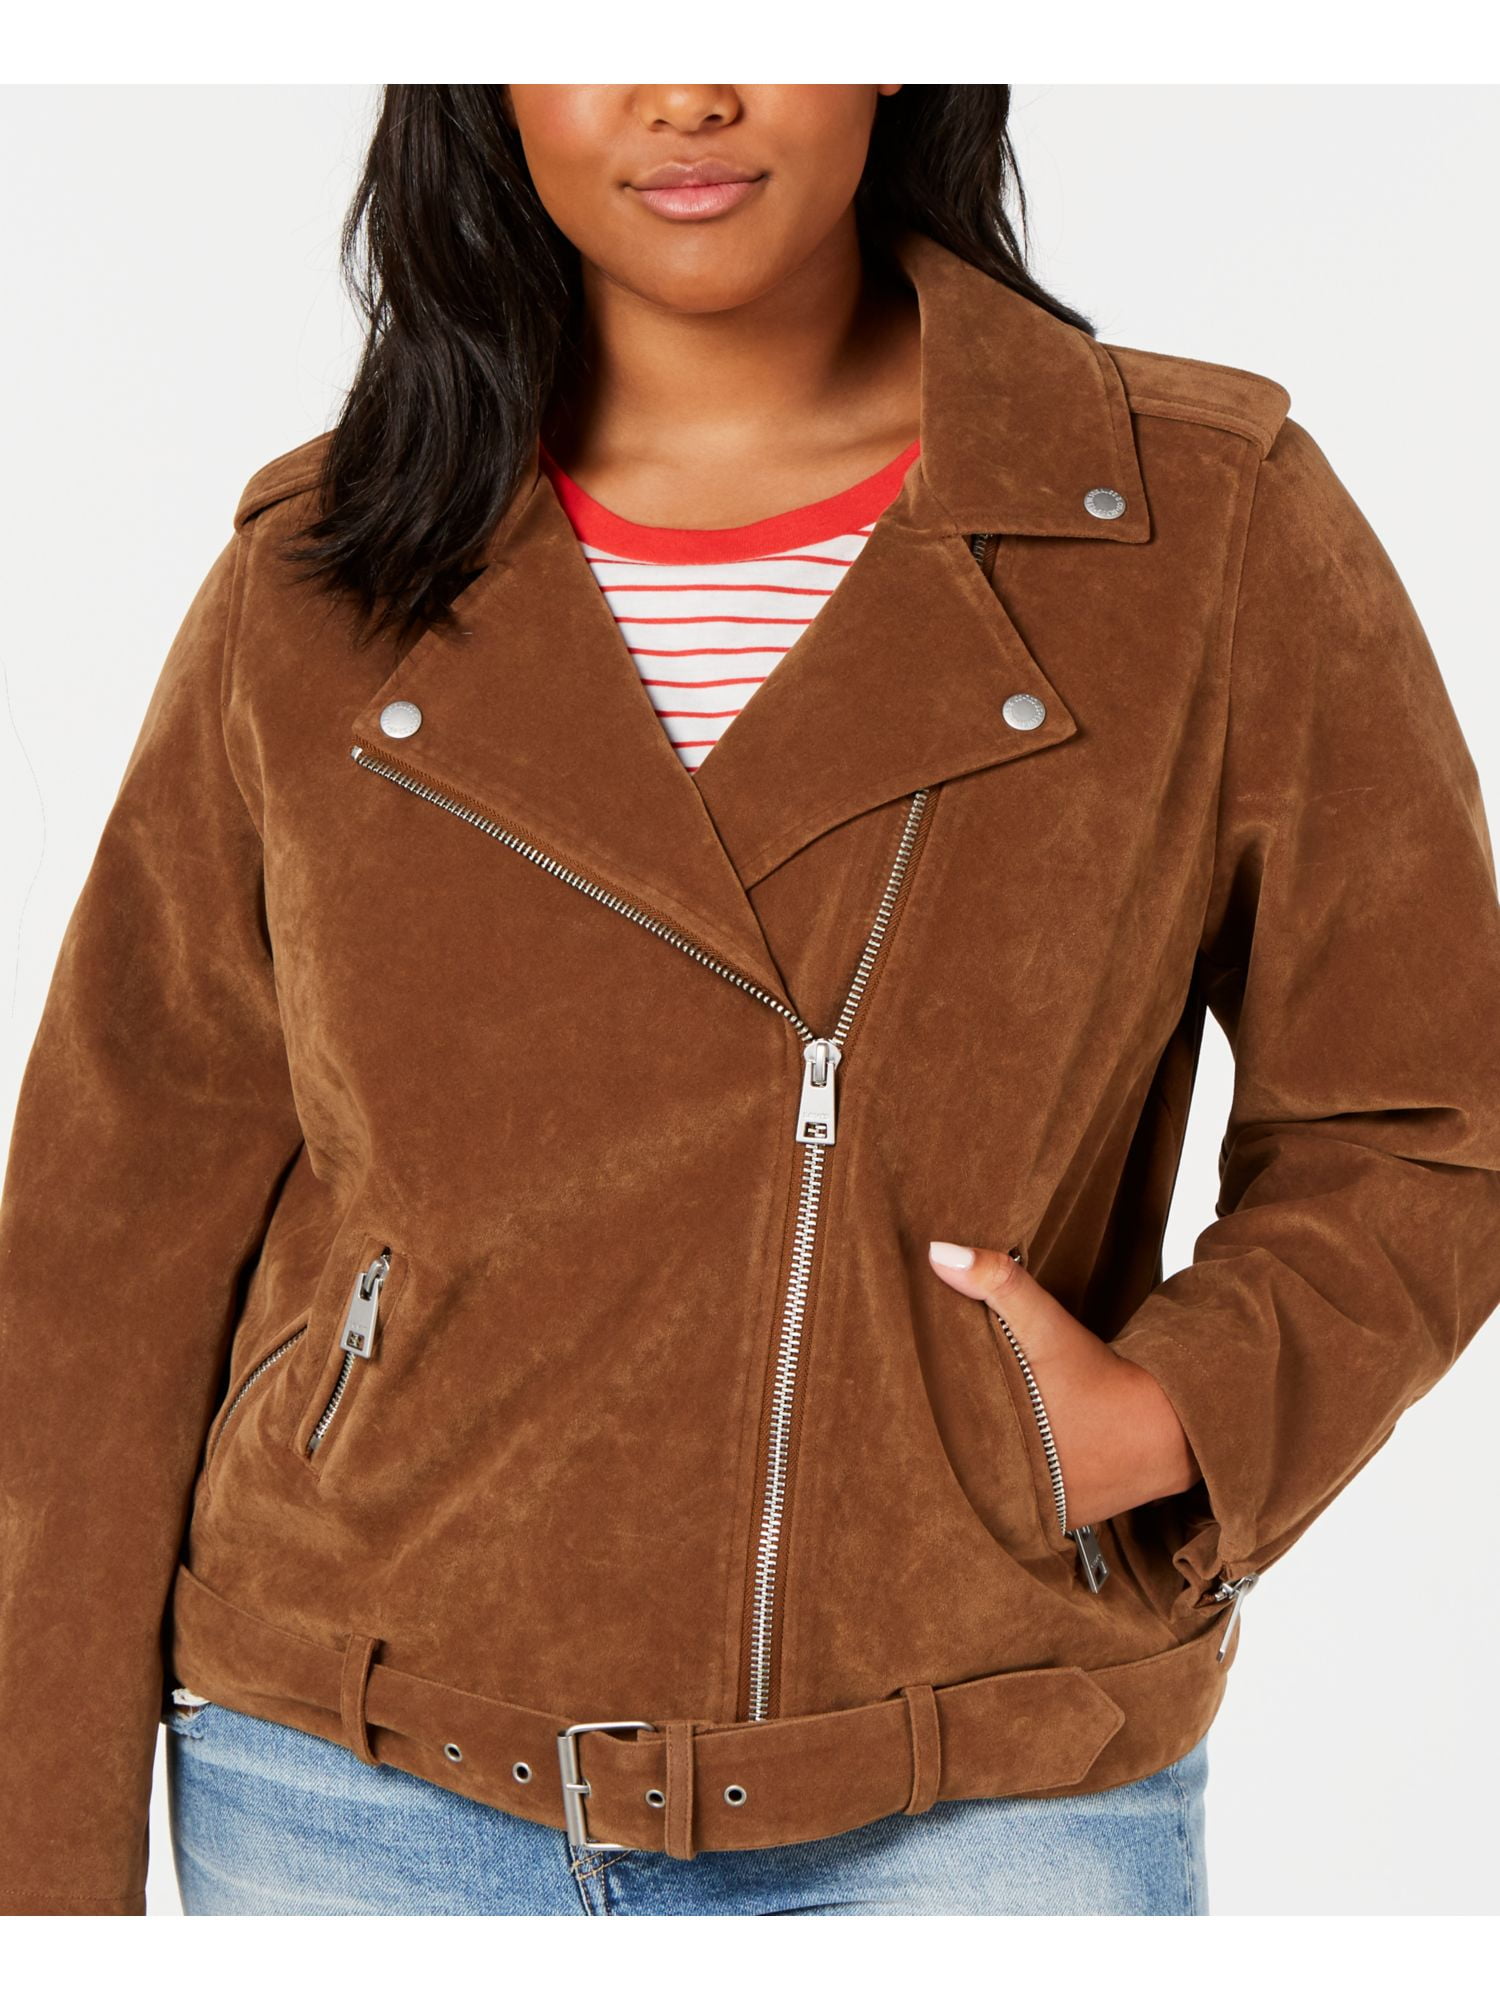 LEVI'S Womens Brown Belted Faux Suede Motorcycle Jacket Plus 3X -  